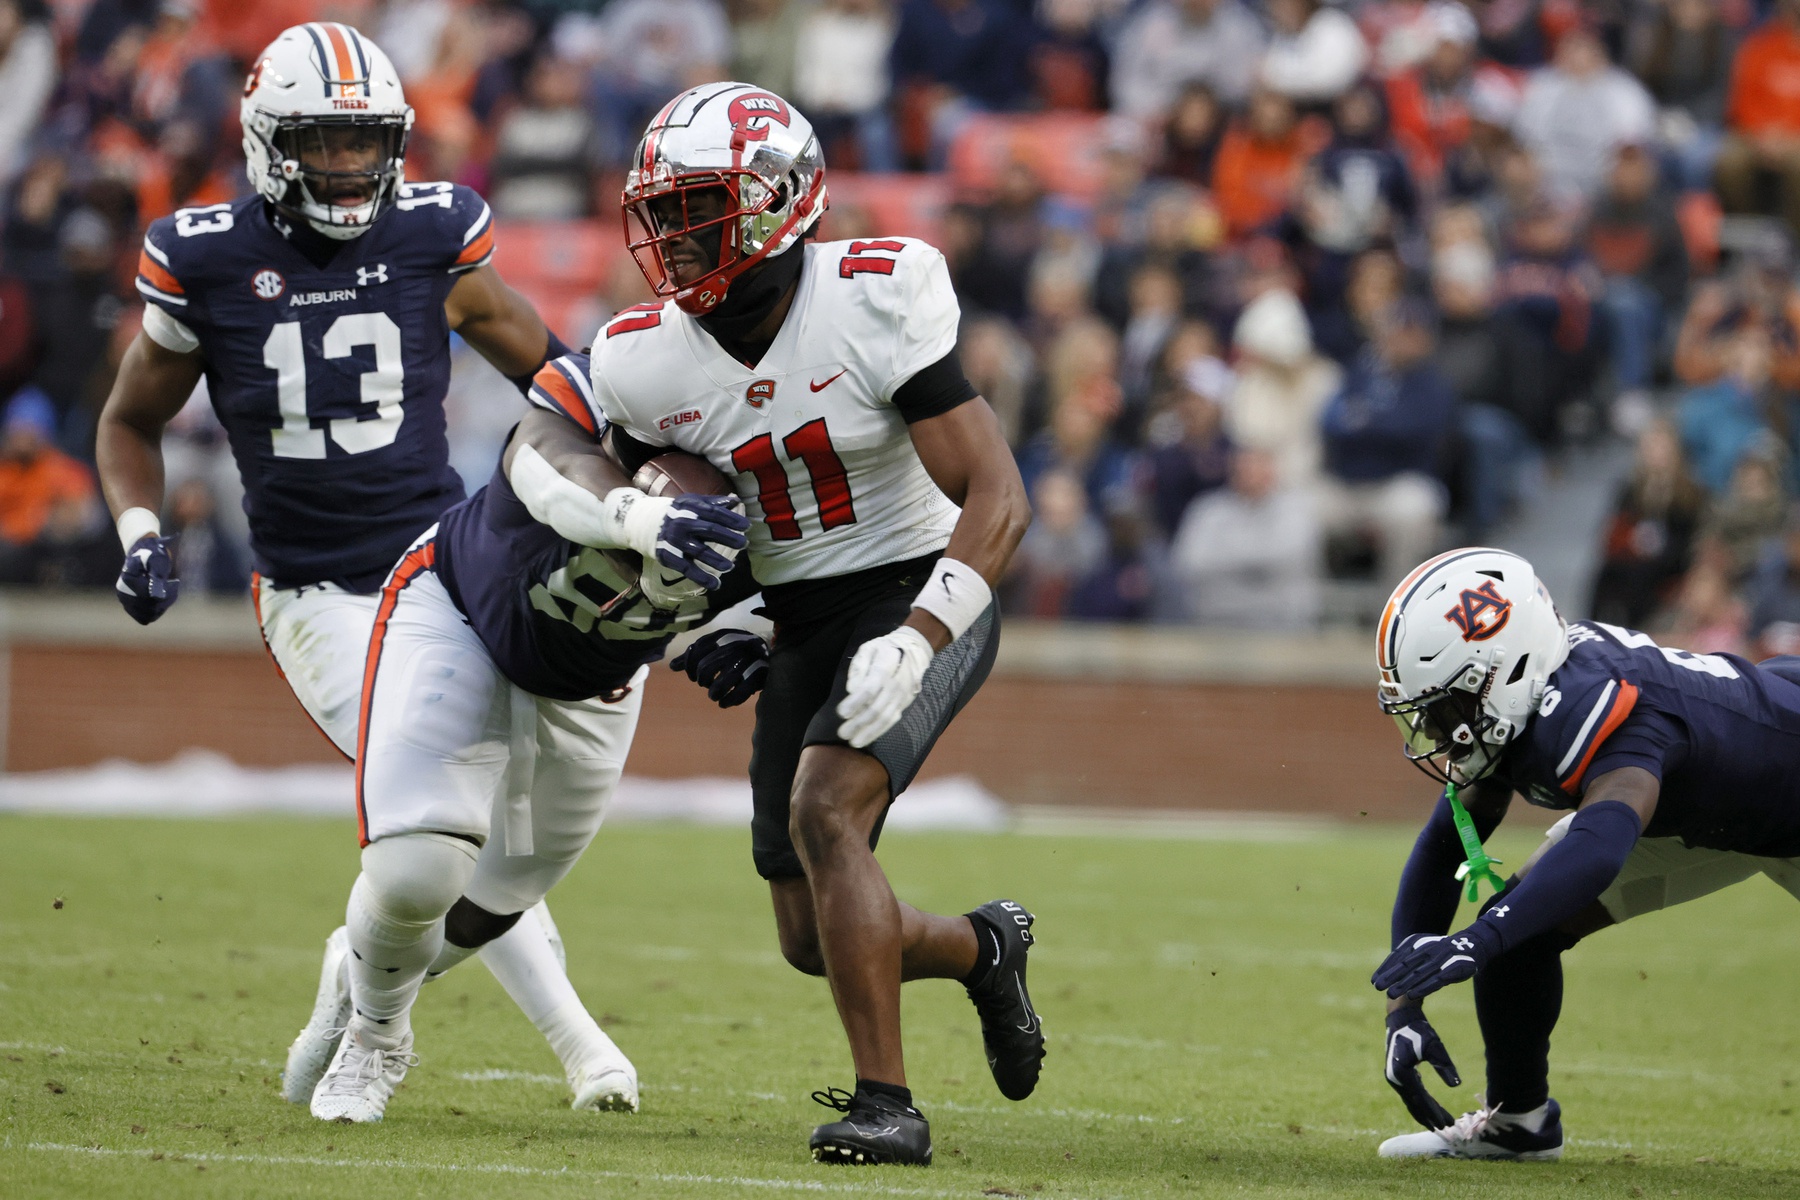 Western Kentucky Hilltoppers WR Malachi Corley (11) runs with the ball against Auburn.